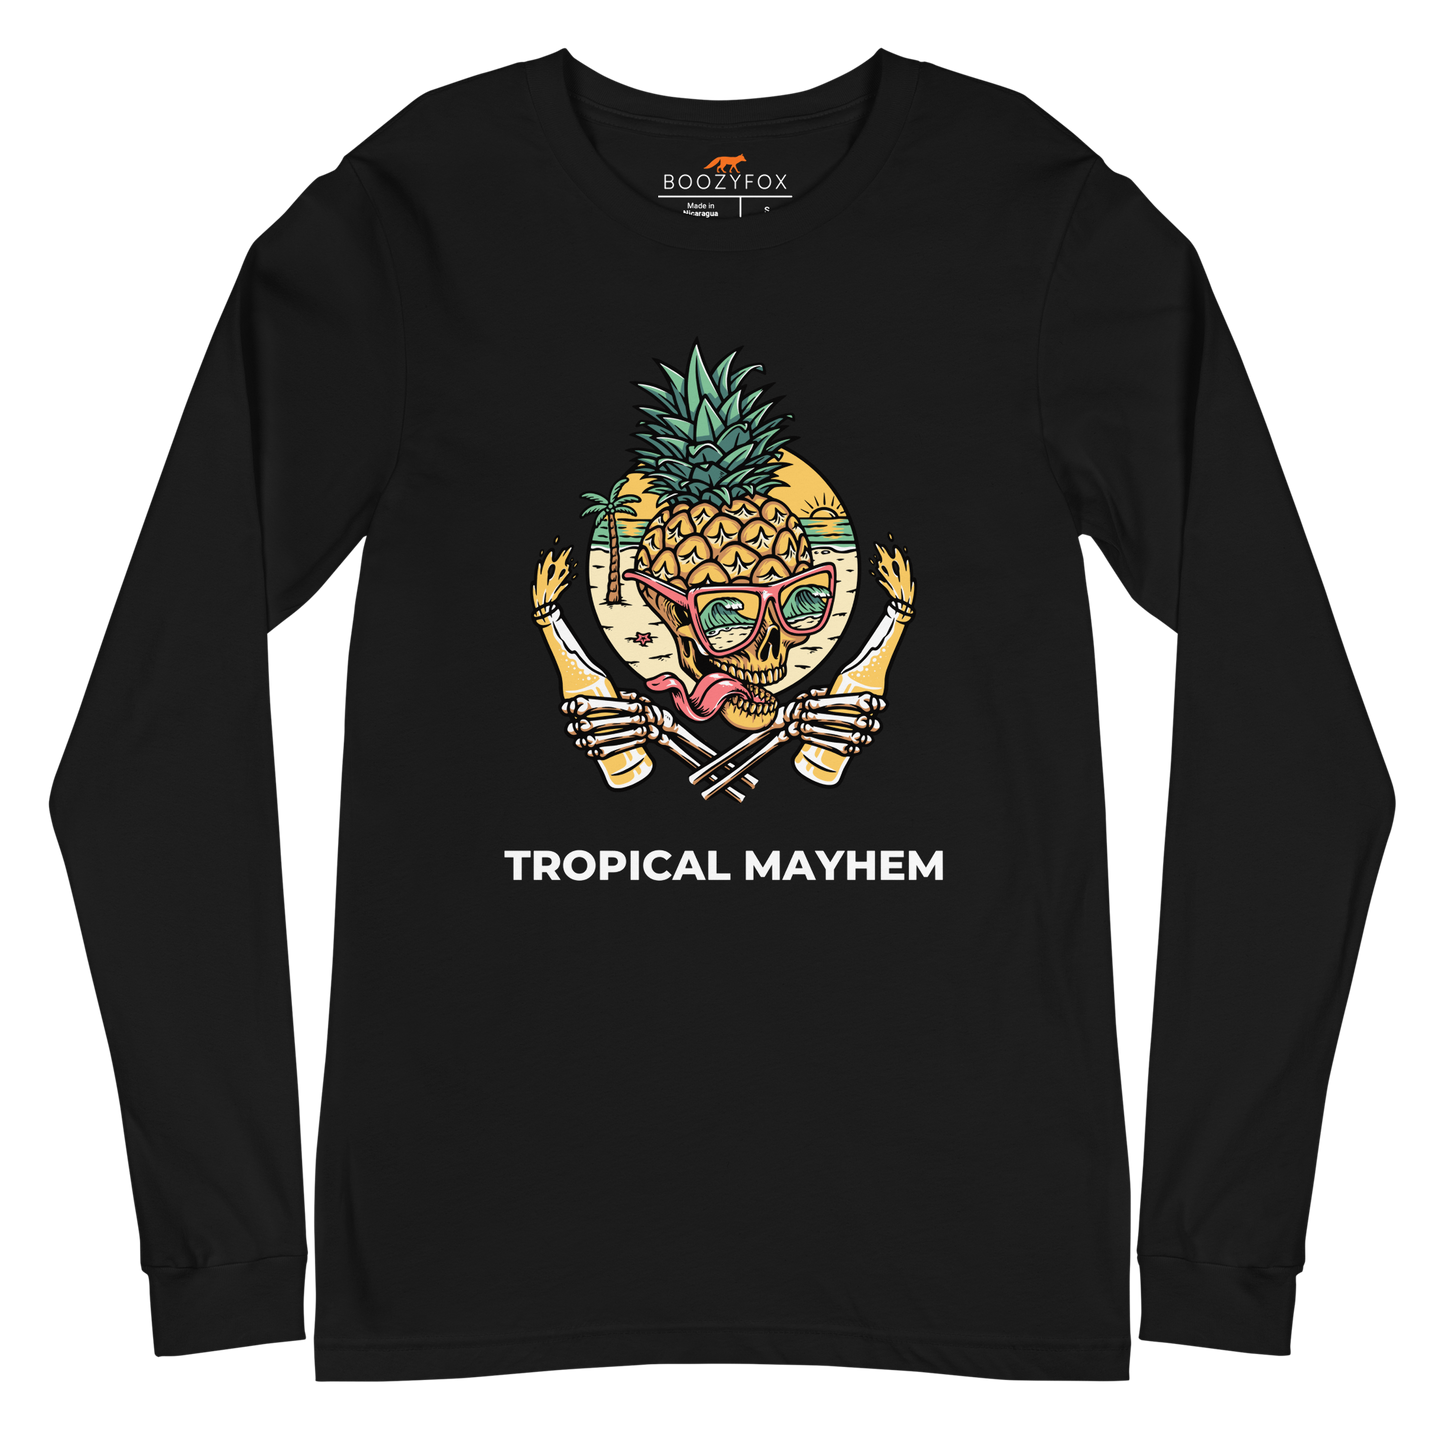 Black Tropical Mayhem Long Sleeve Tee featuring a Crazy Pineapple Skull graphic on the chest - Funny Pineapple Long Sleeve Graphic Tees - Boozy Fox